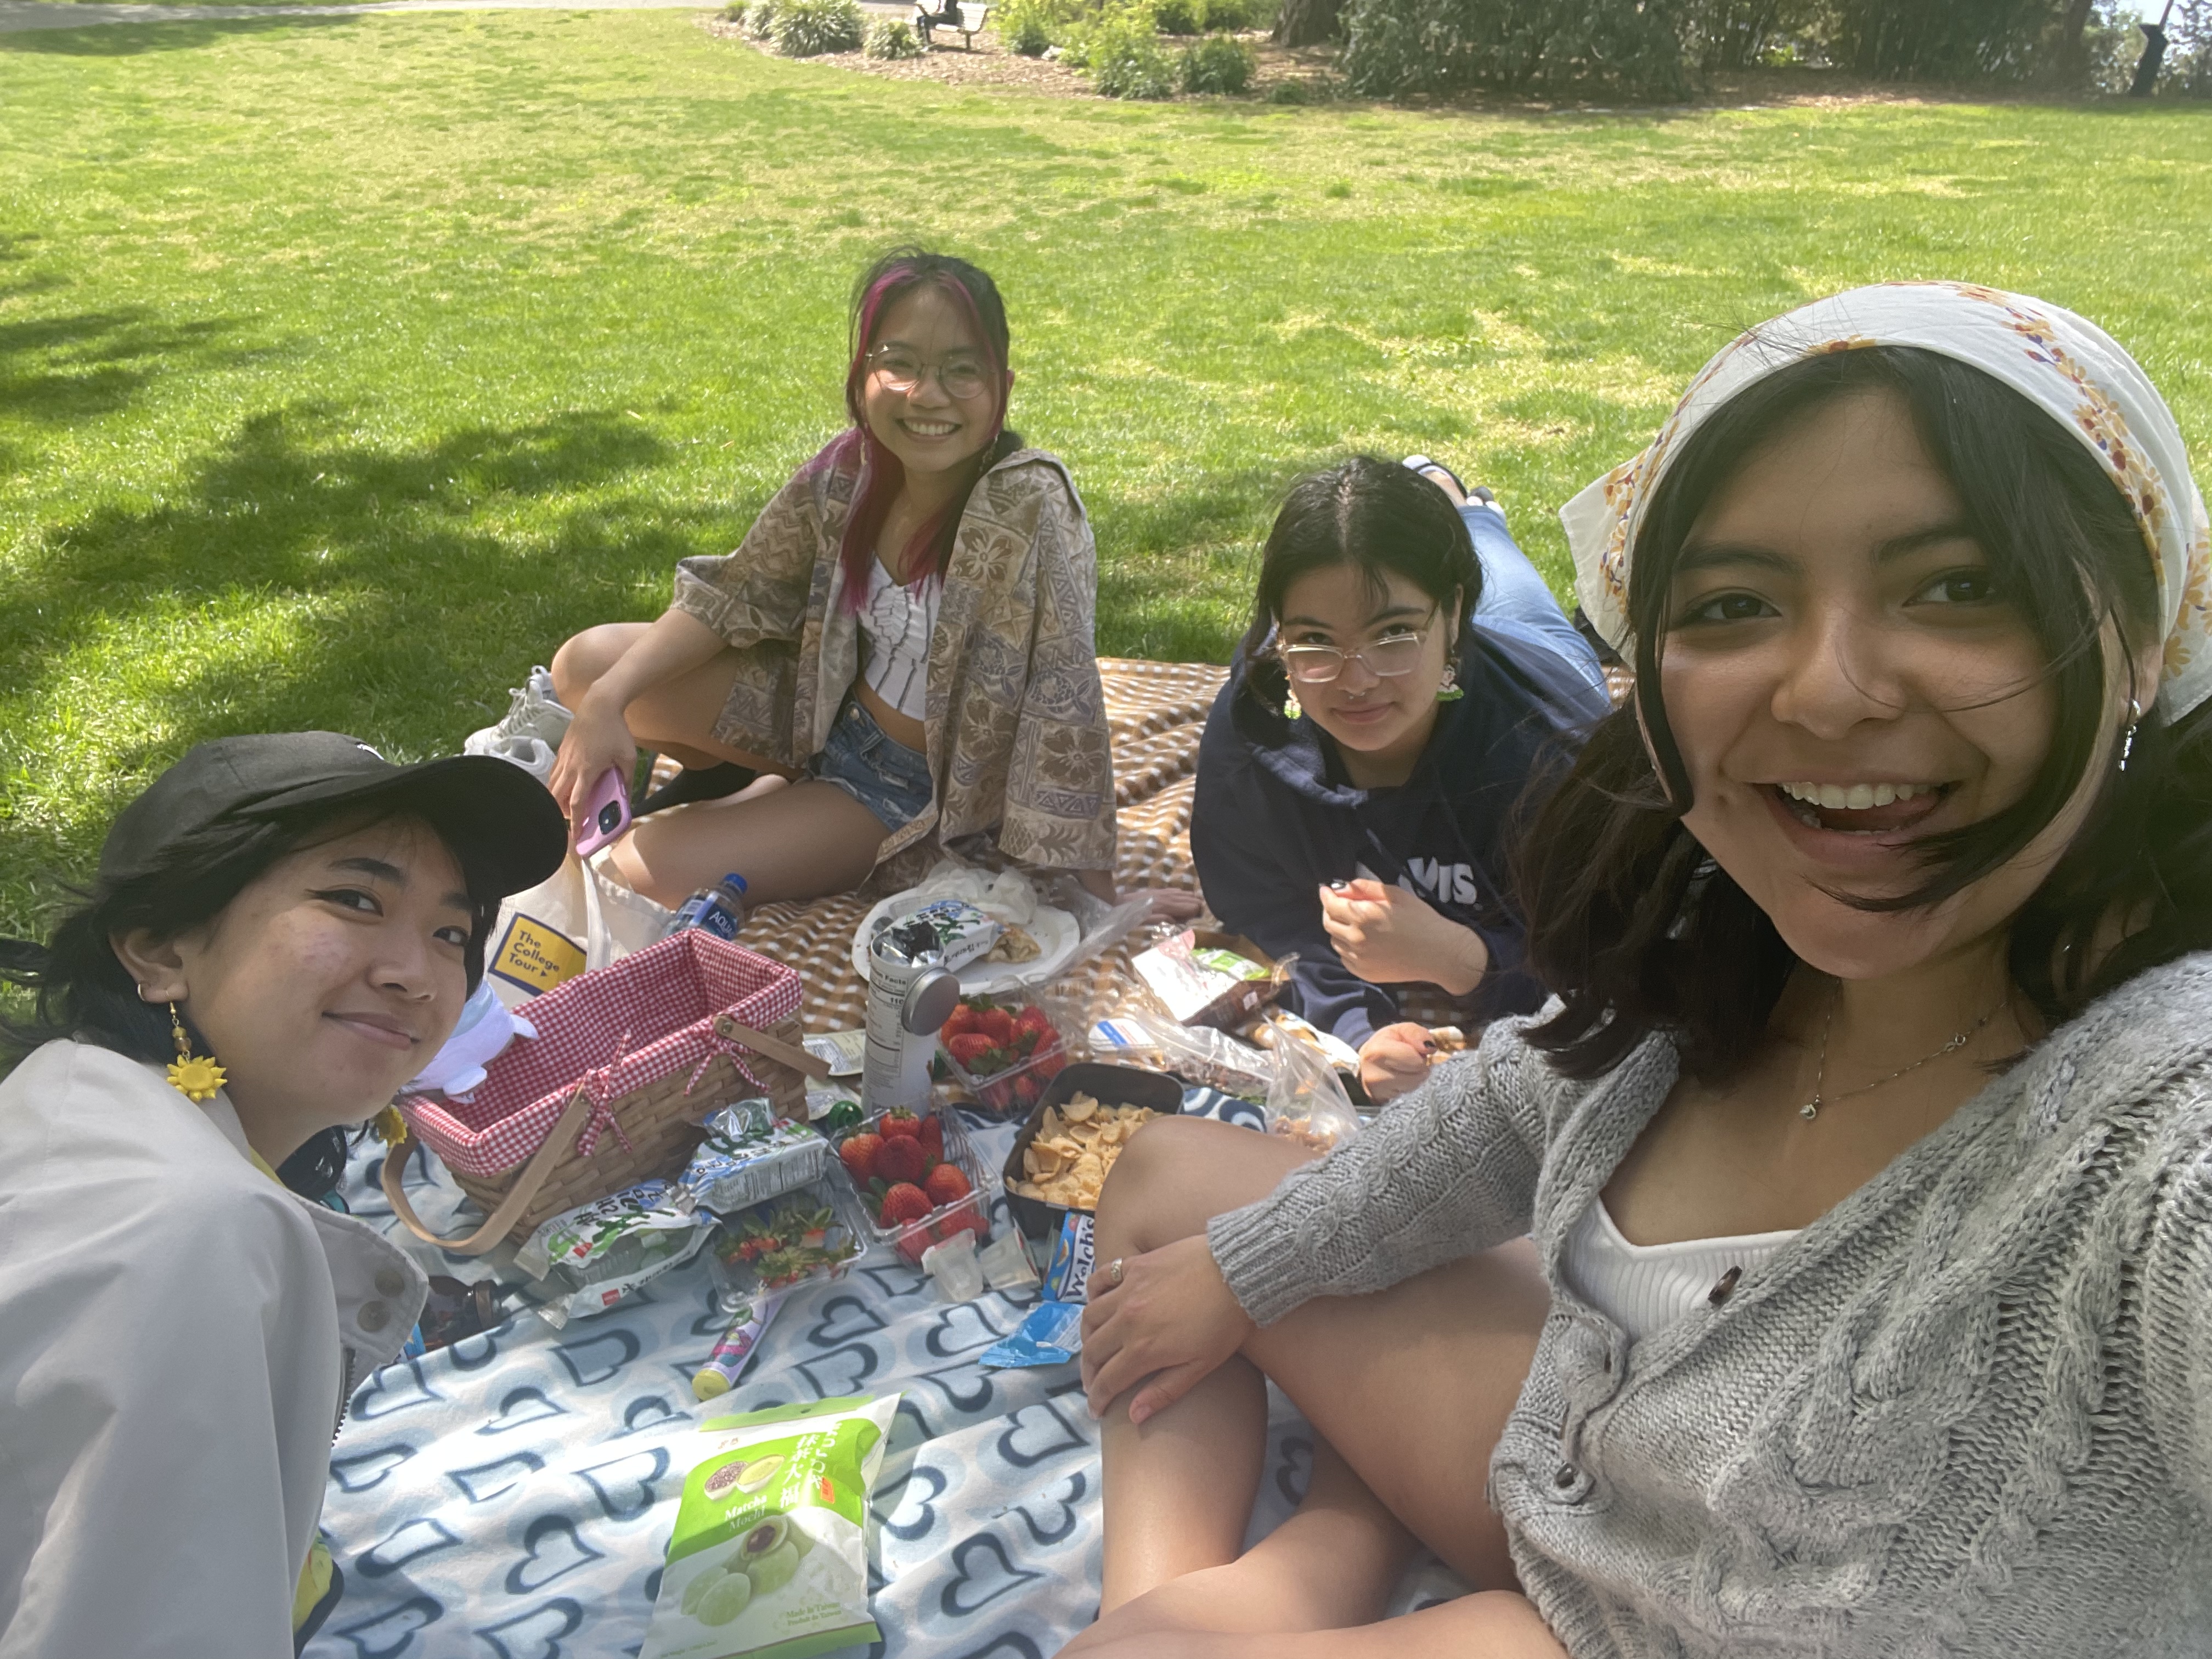 Four people enjoying a picnic in a park